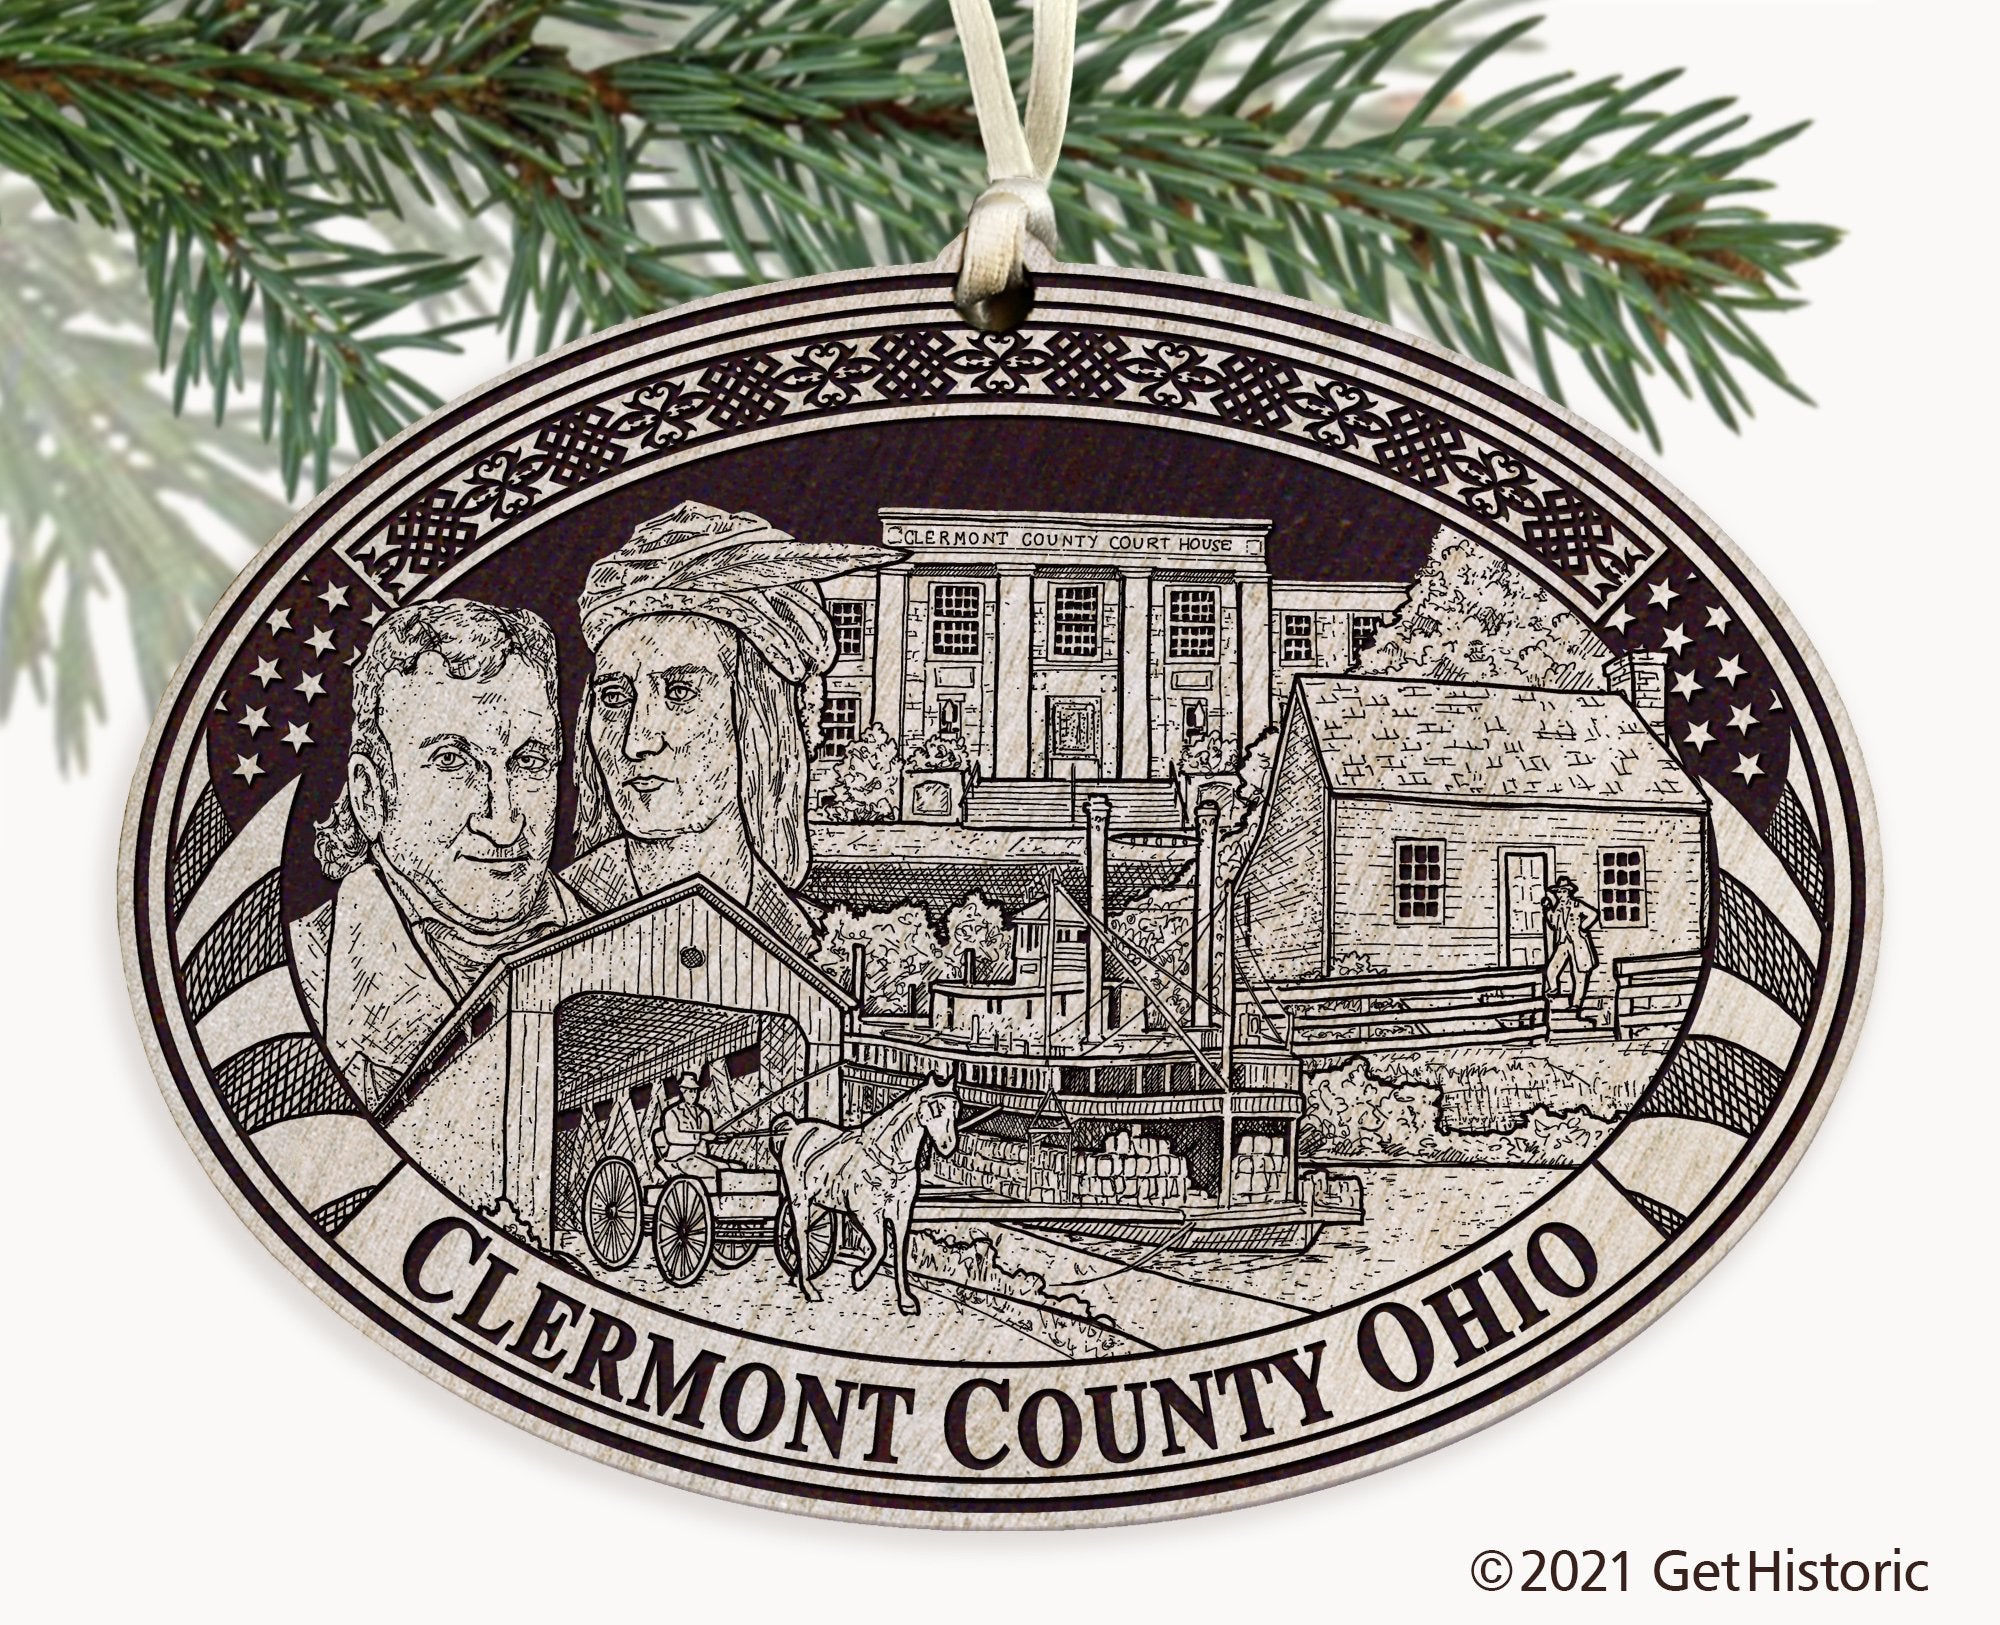 Clermont County Ohio Engraved Ornament